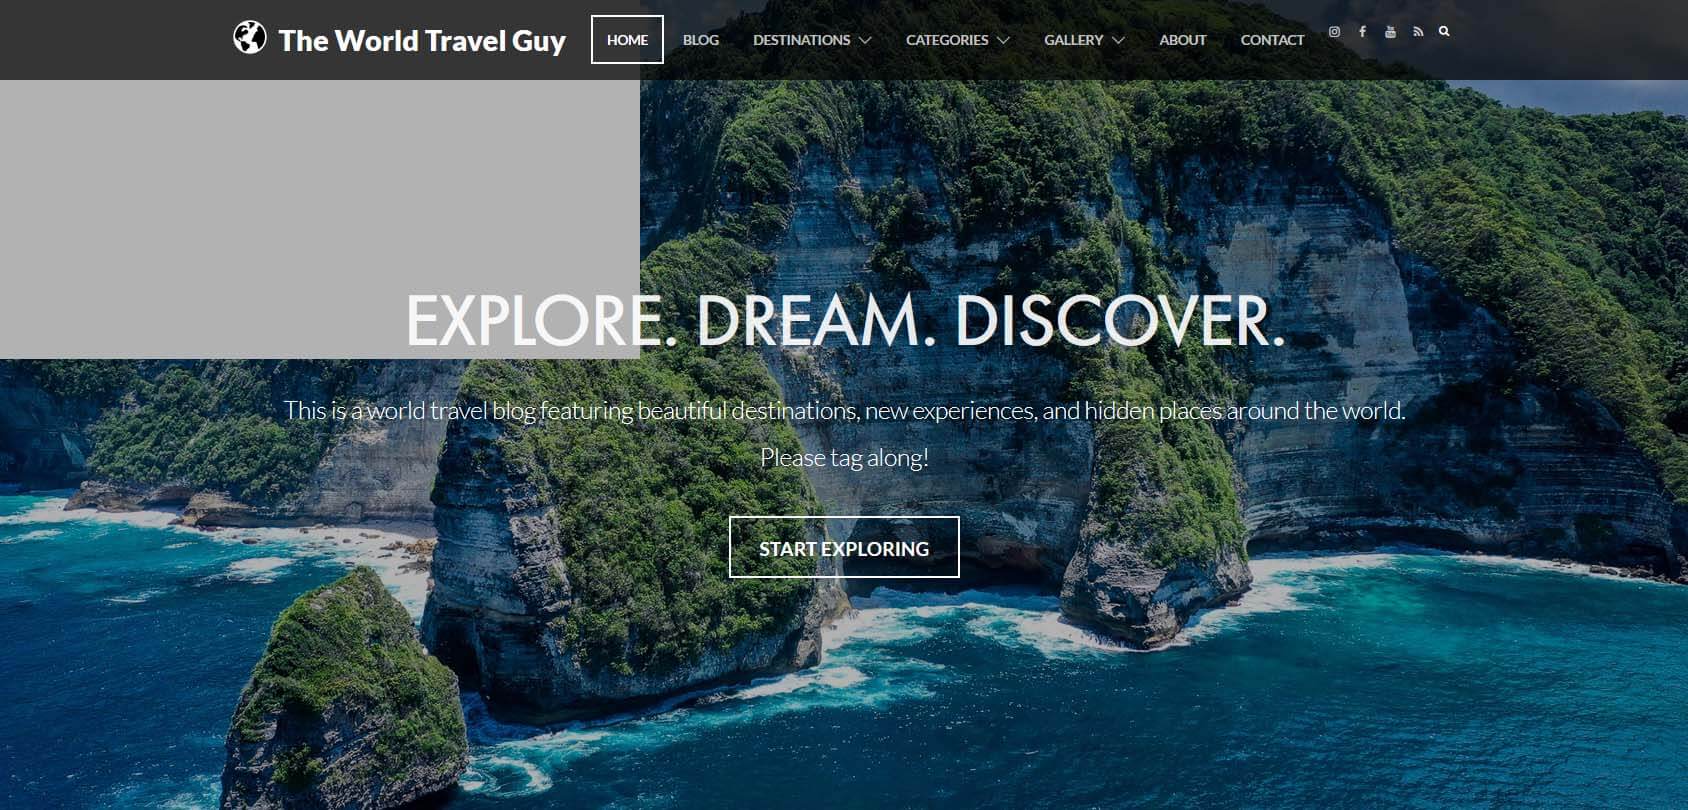 The World Travel Guide Homepage